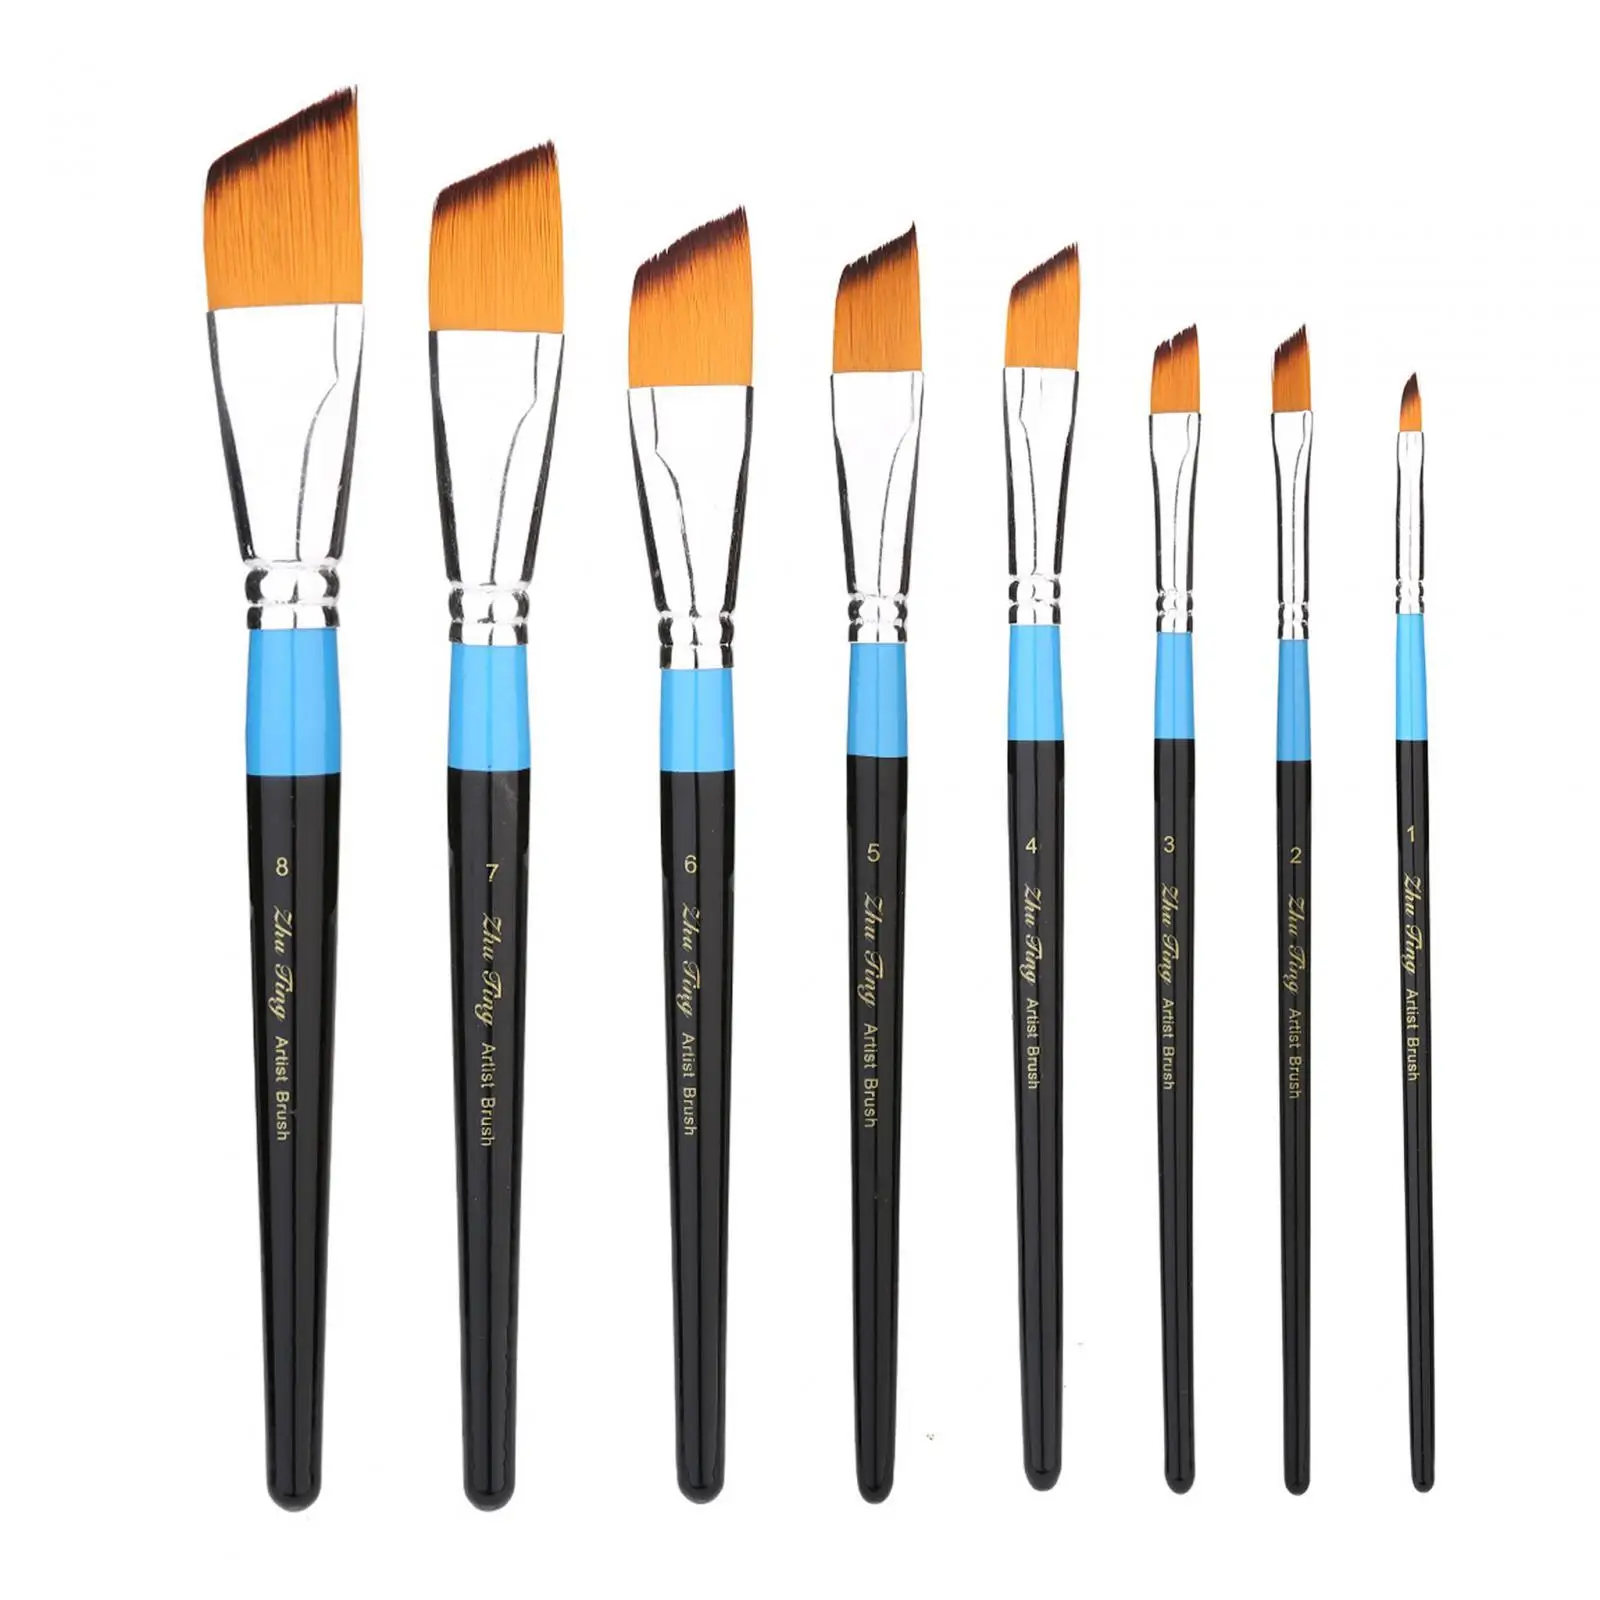 8 Pieces Paint Brush Set Professional for Beginner Pros Artist Brushes for Acrylic Gouache Watercolor Oil Arts Crafts Supplies